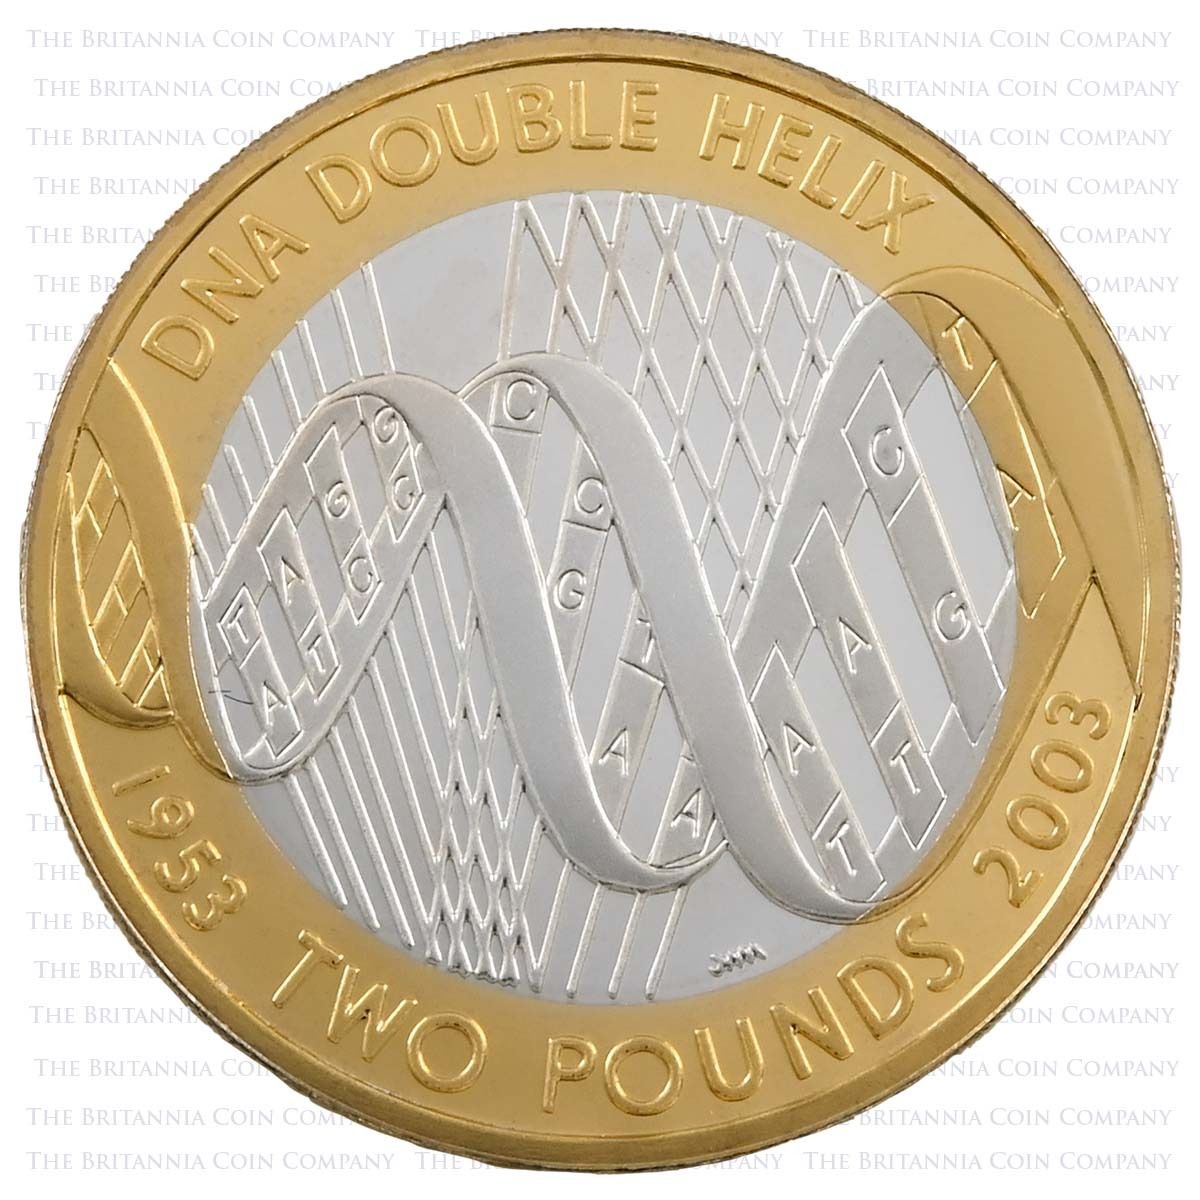 UKDNASP 2003 DNA Double Helix Two Pound Silver Proof Coin Reverse